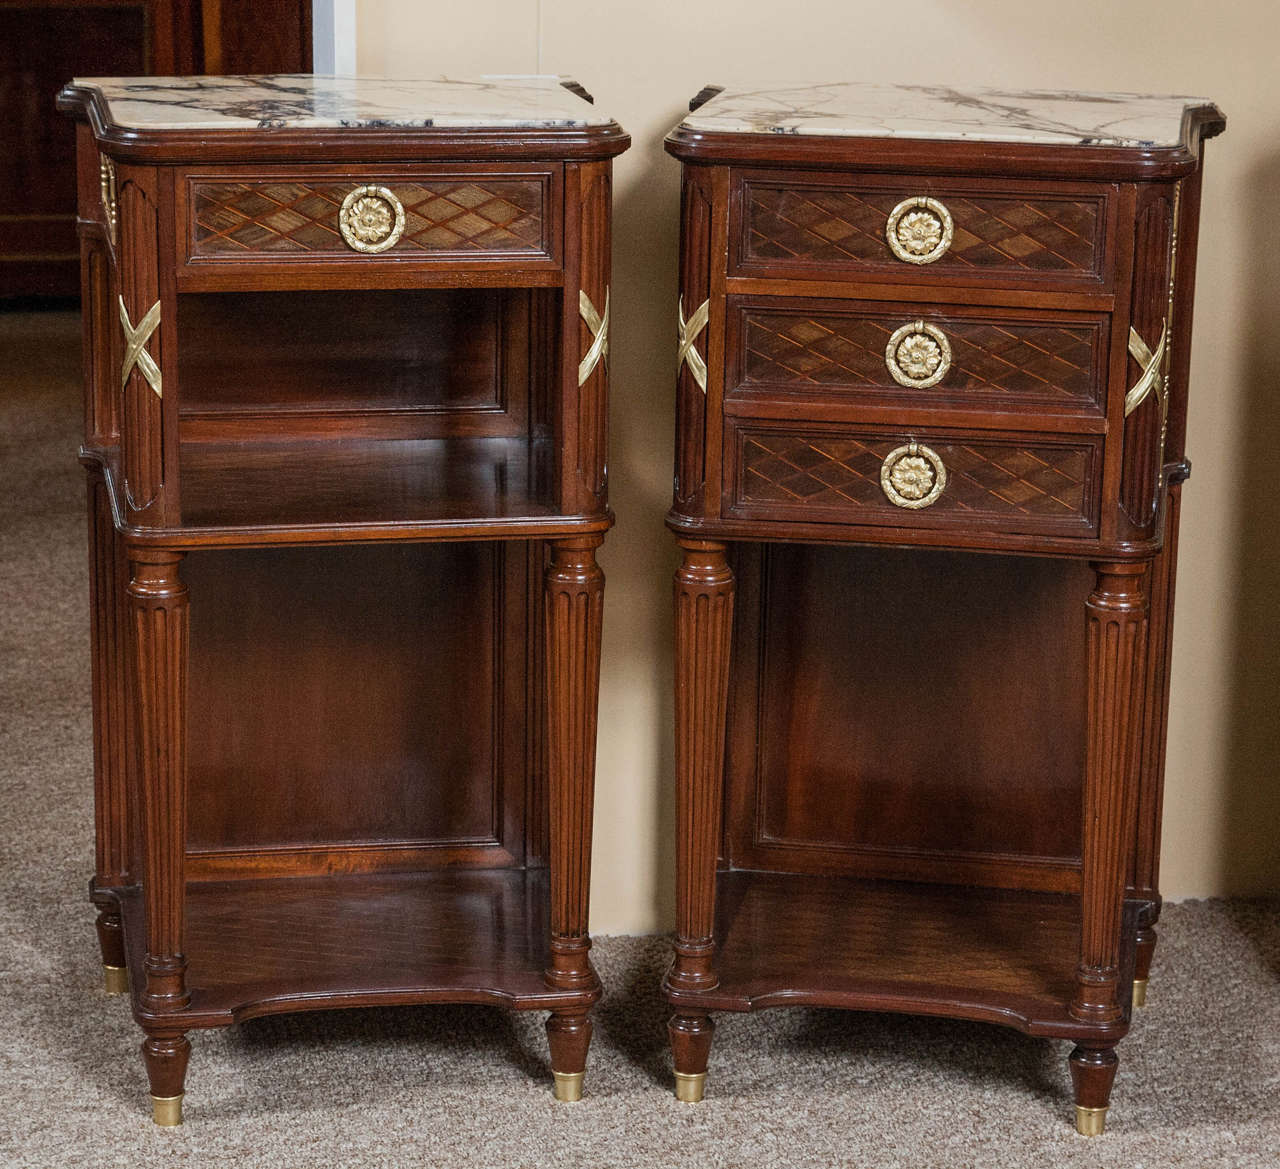 Pair of French Louis XVI Style stands or night tables. These wonderfully crafted crème tables have marble tops with grey and black veining and are possibly by Guillaume Grohé. One has three drawers with a basket weave design with brass pulls. The